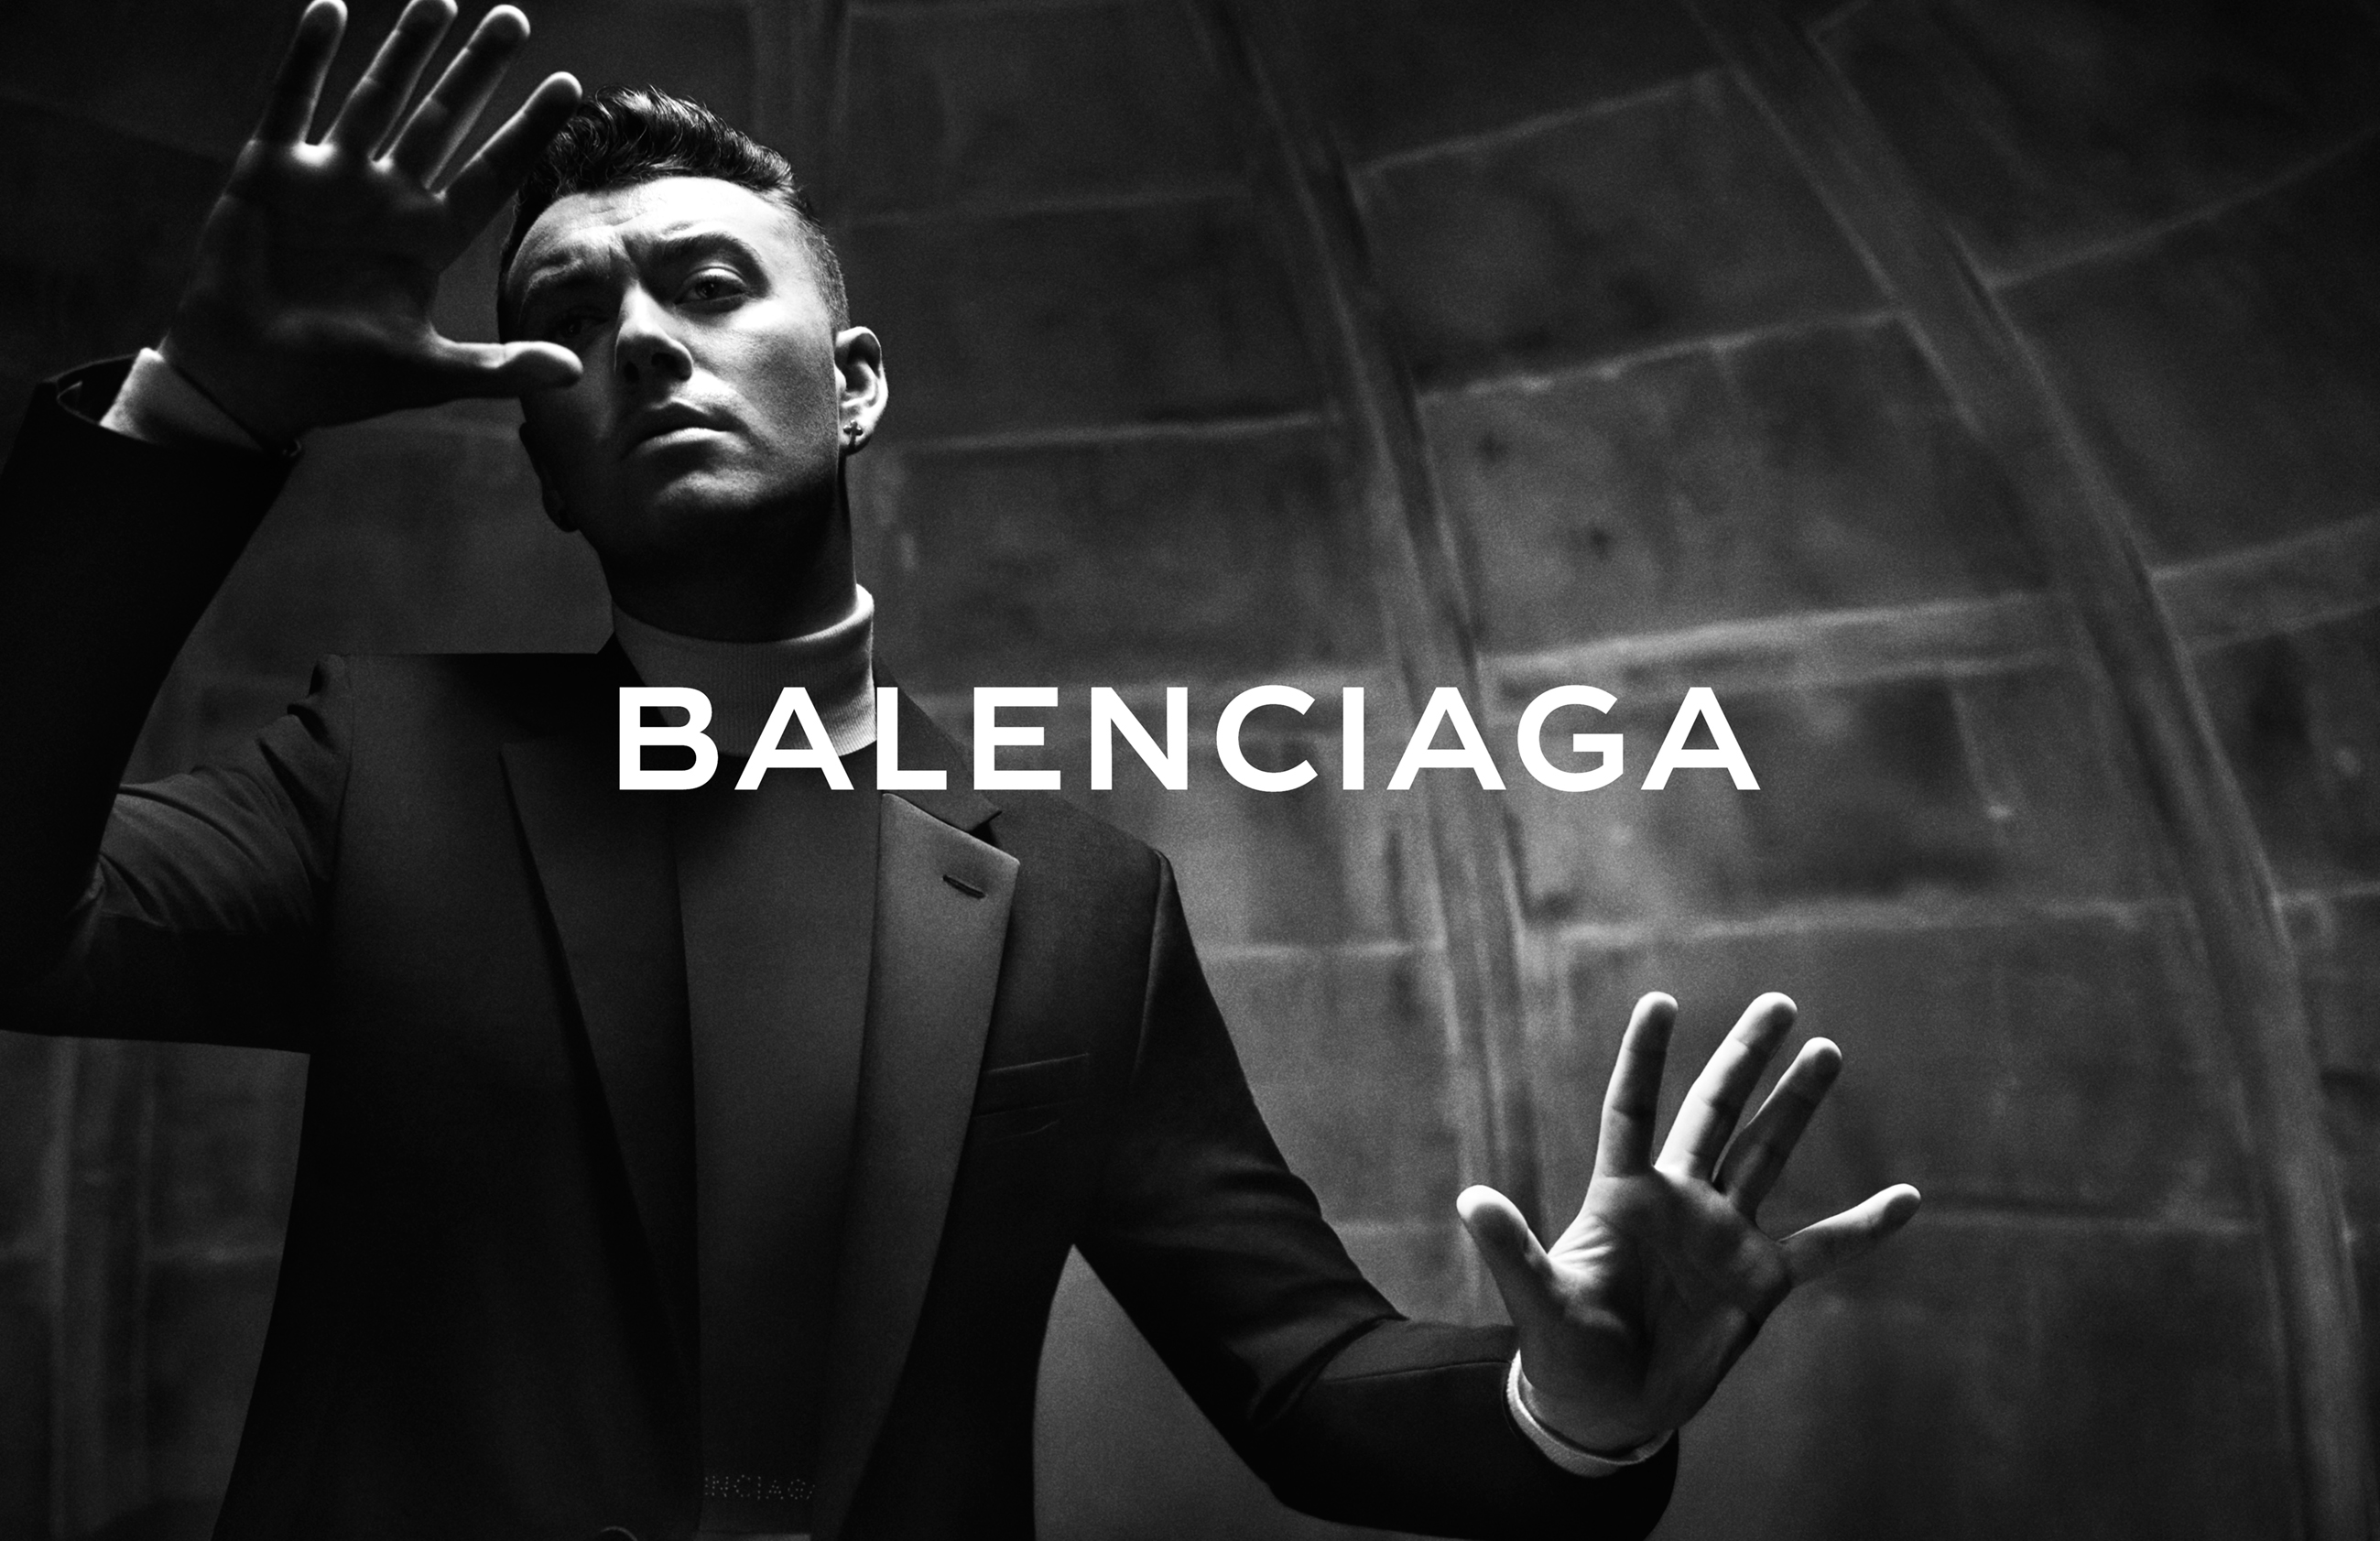 Singer and songwriter Sam Smith is the new face of Balenciaga